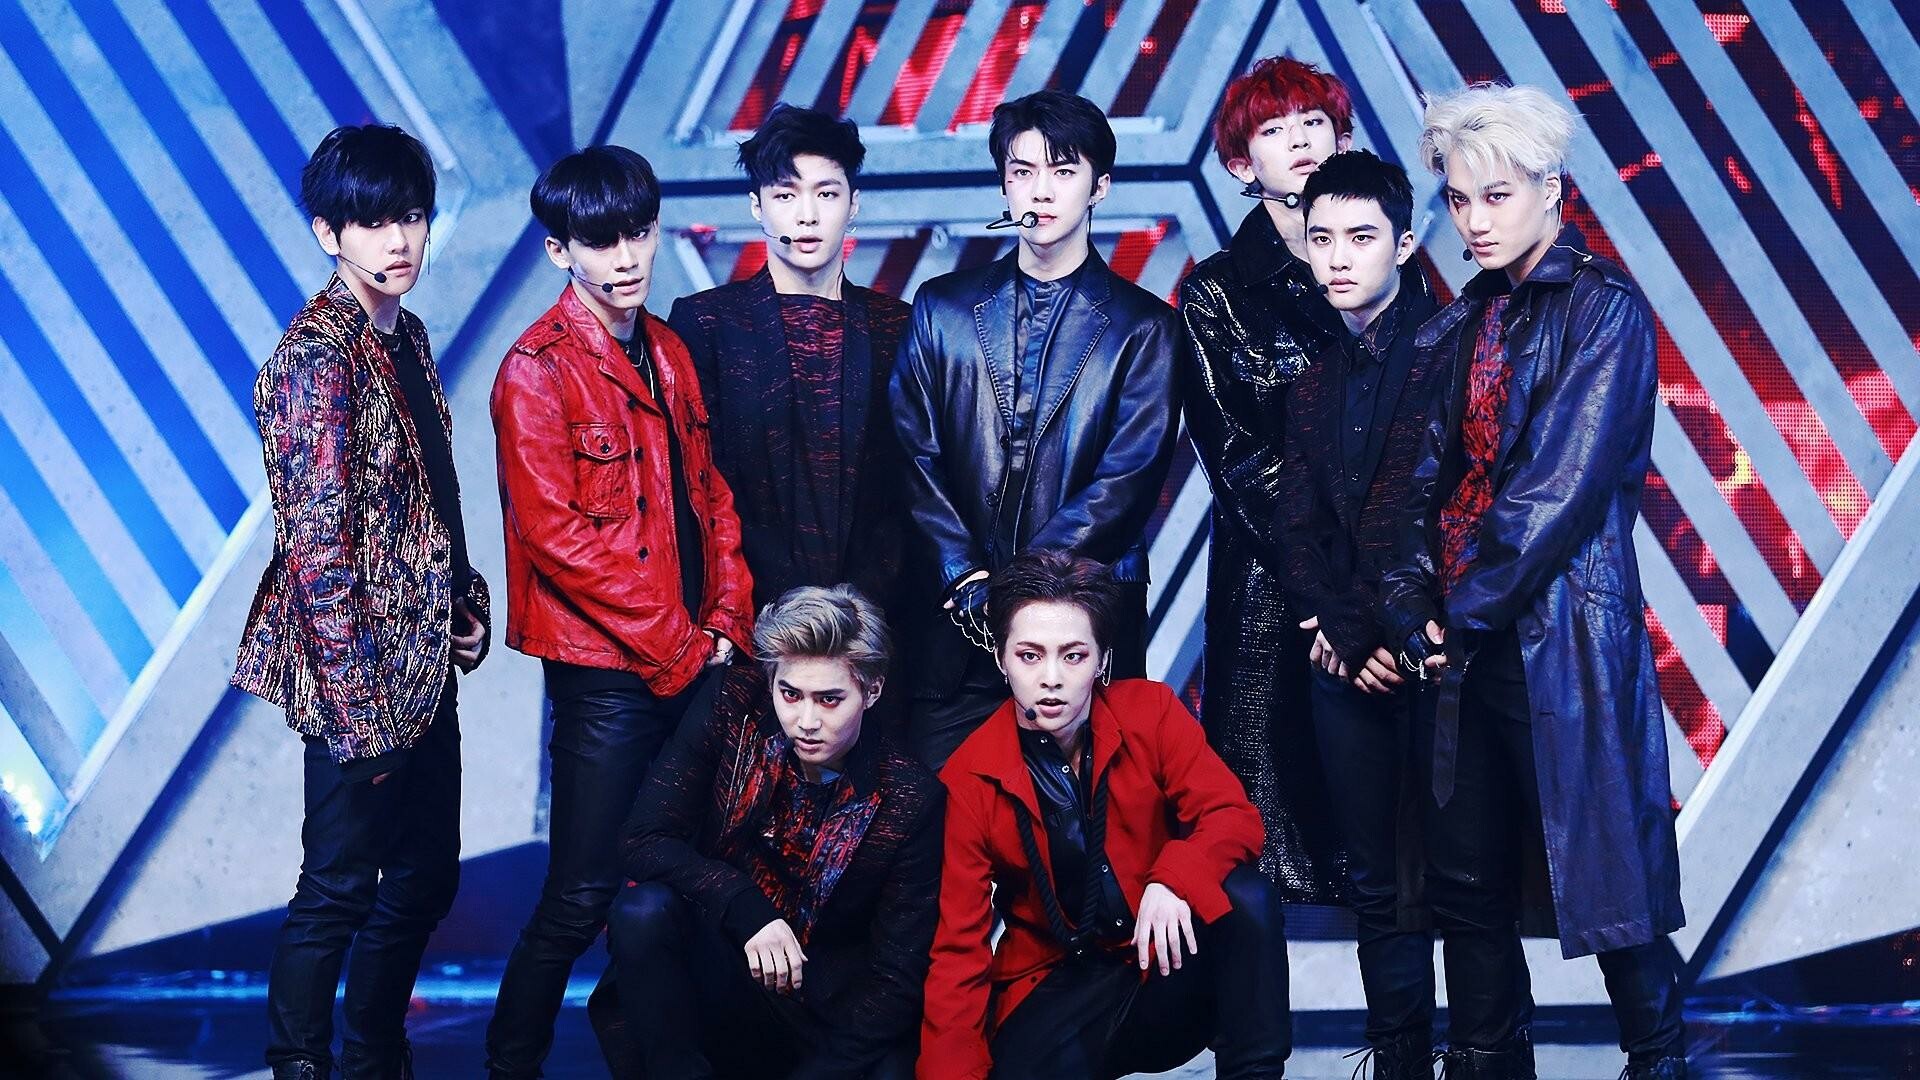 EXO: Prior their debut, the band released two singles, "What Is Love" and "History". 1920x1080 Full HD Wallpaper.